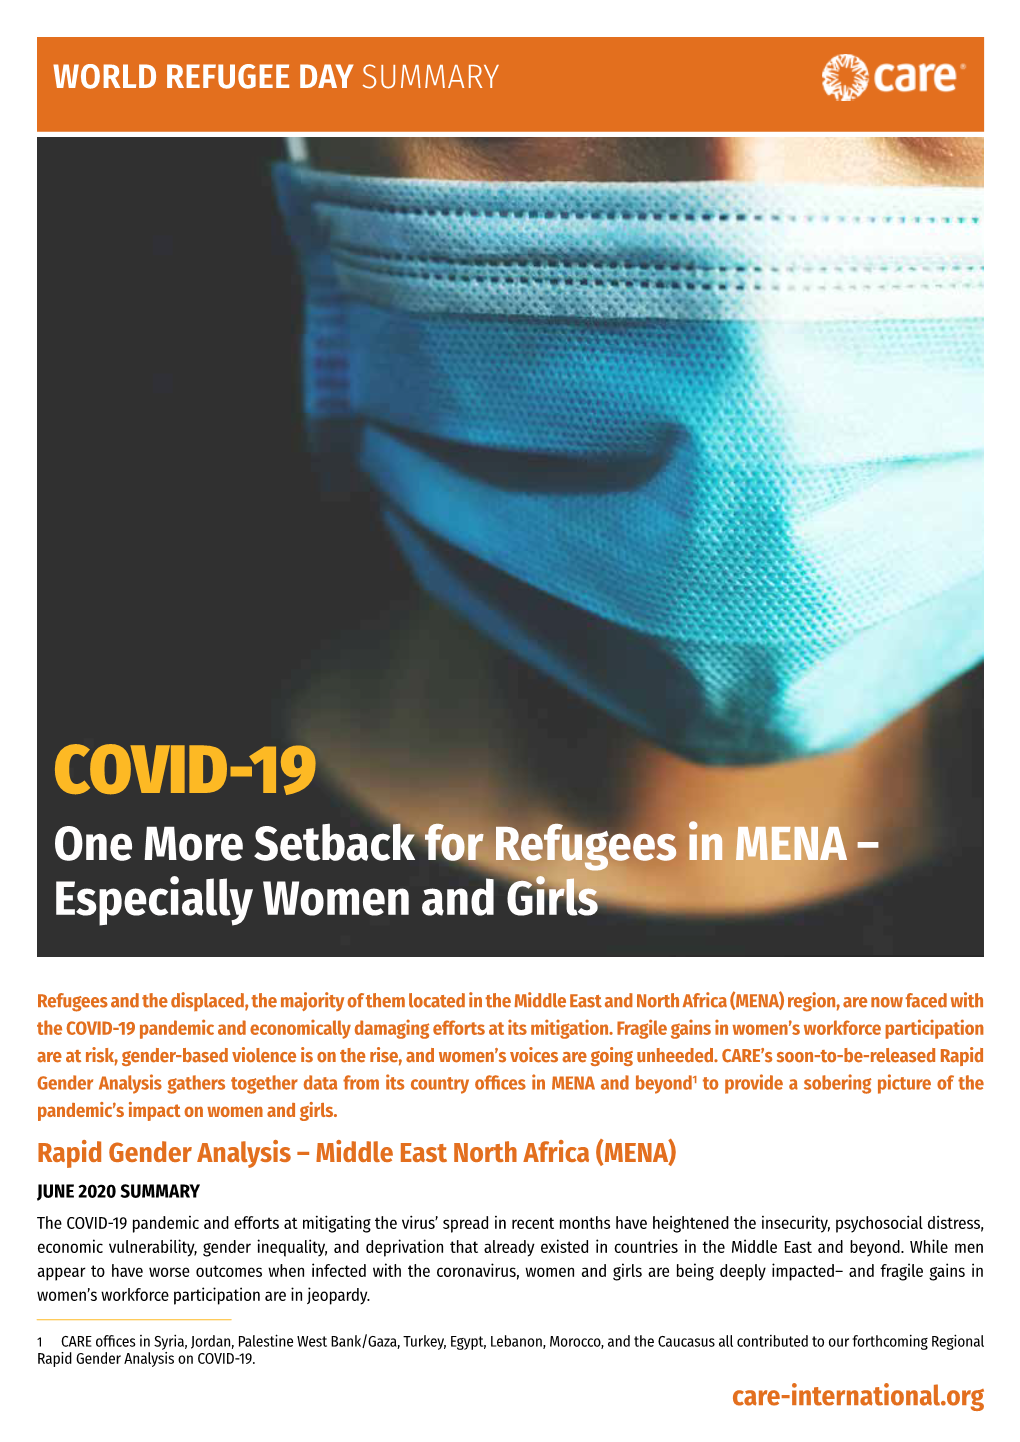 COVID-19 One More Setback for Refugees in MENA – Especially Women and Girls